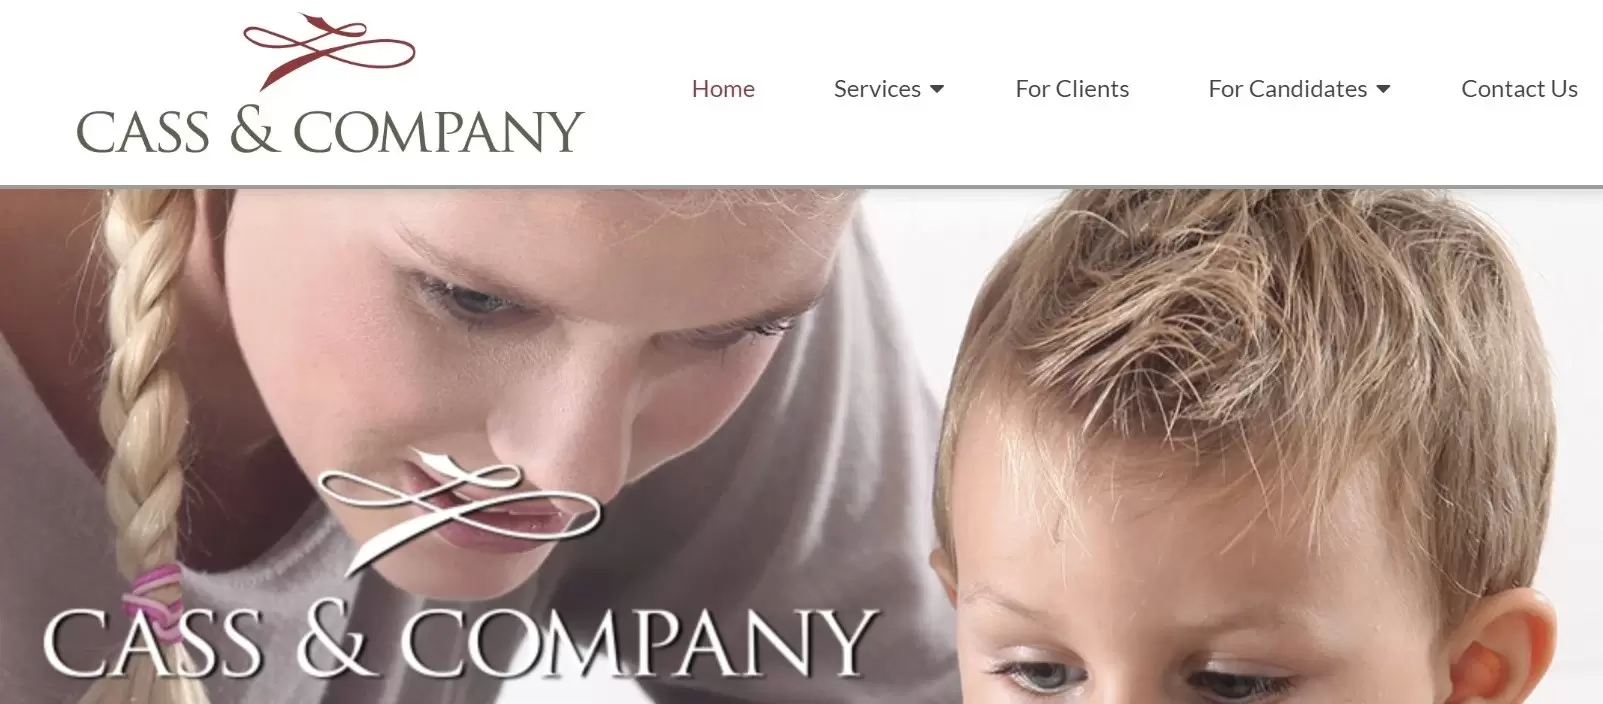 Cass & Company profile and reviews